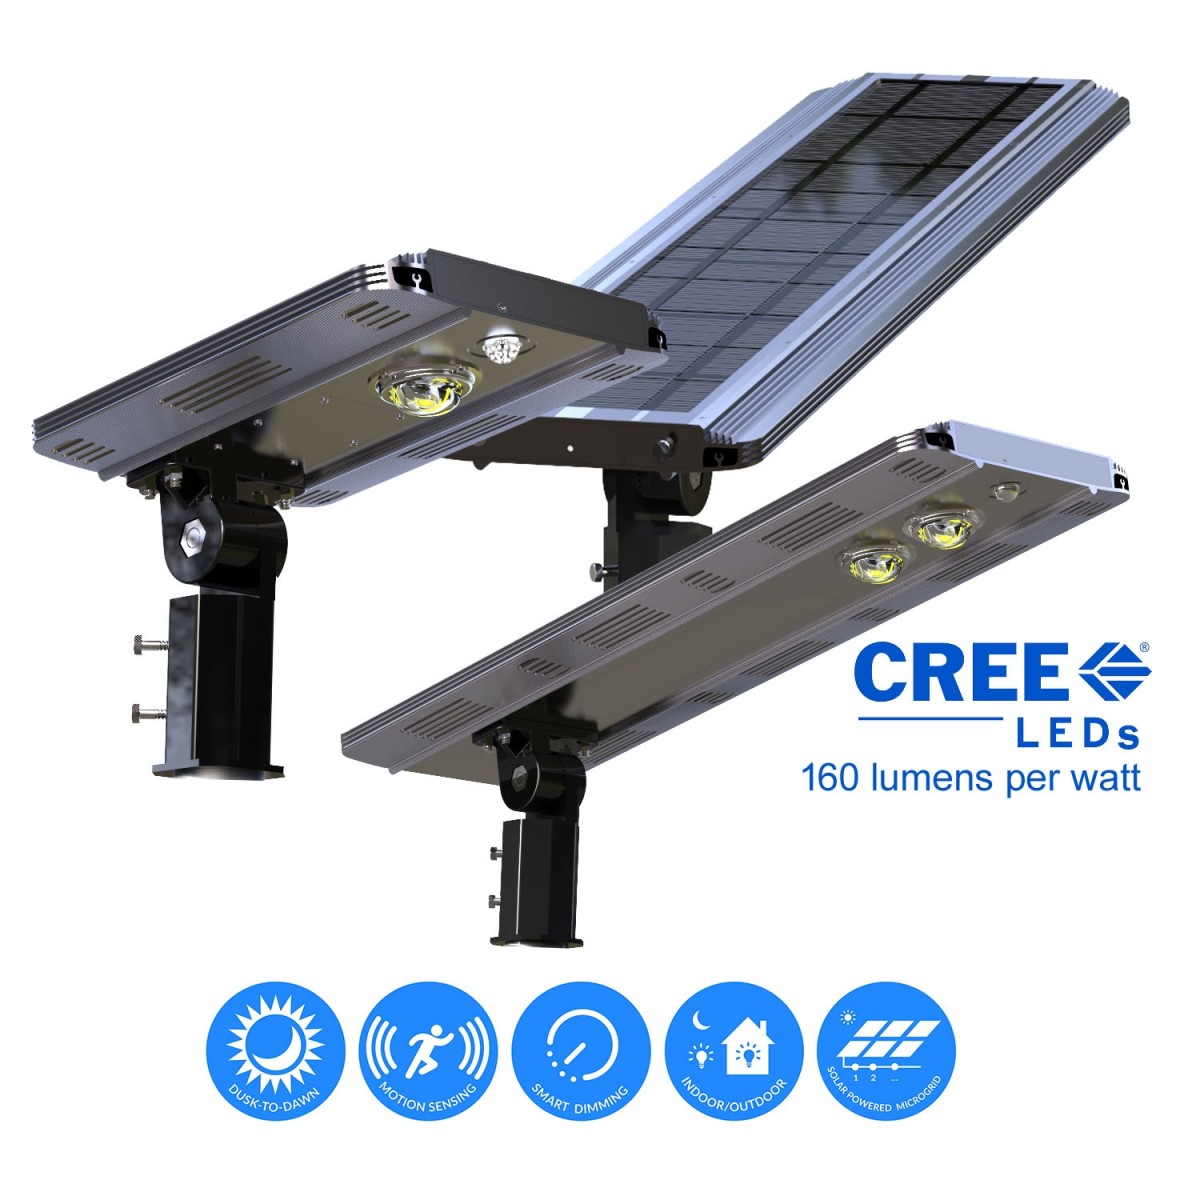 Ee815w-sh15 Solar Power Smart Cree Led Street Light For Commercial Residential Parking Bike Paths Walkways Courtyard 15w